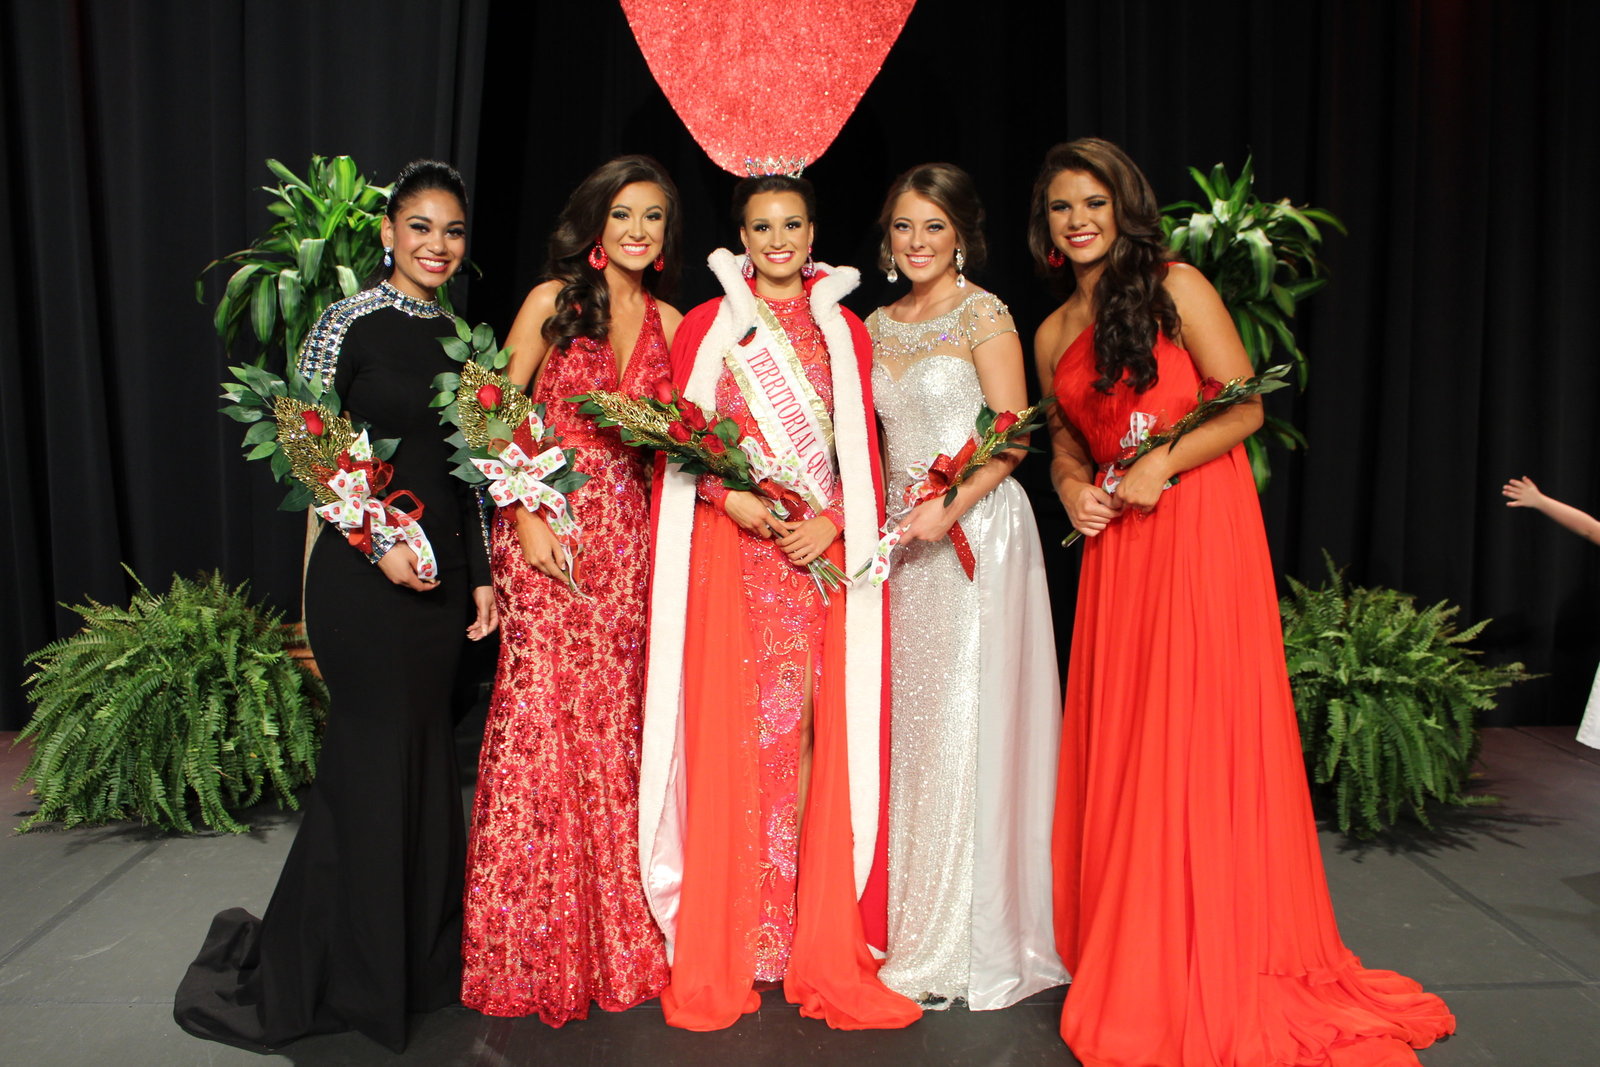 West Tennessee Strawberry Festival - Humboldt TN - Pageant - Main Terr10